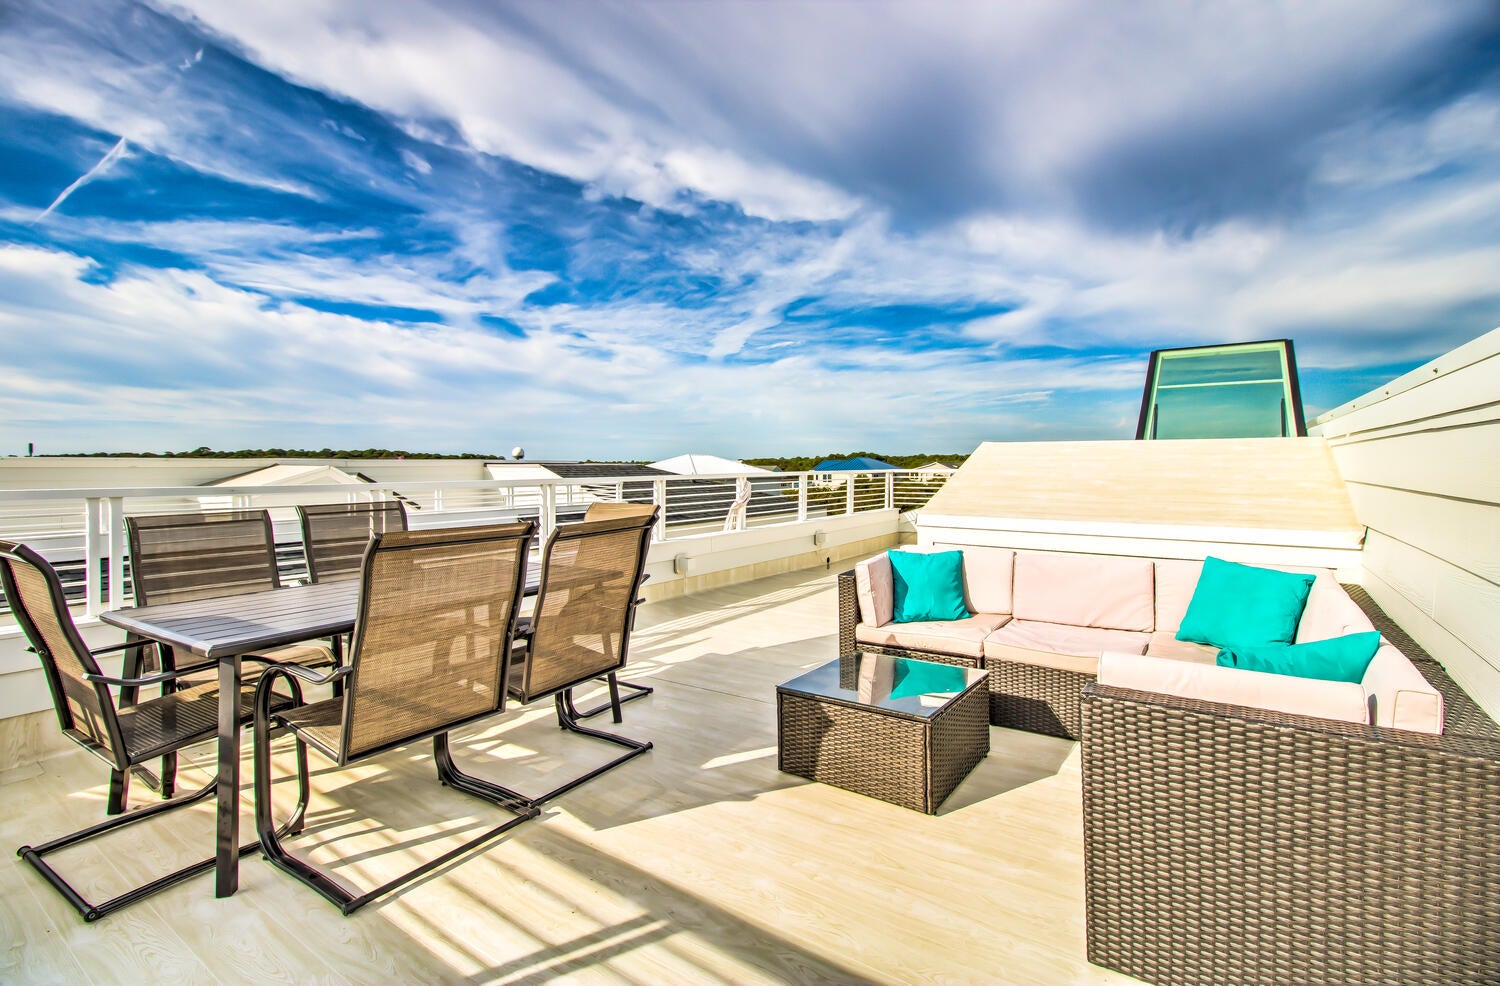 Serenity+by+the+Sea-Rooftop+Deck